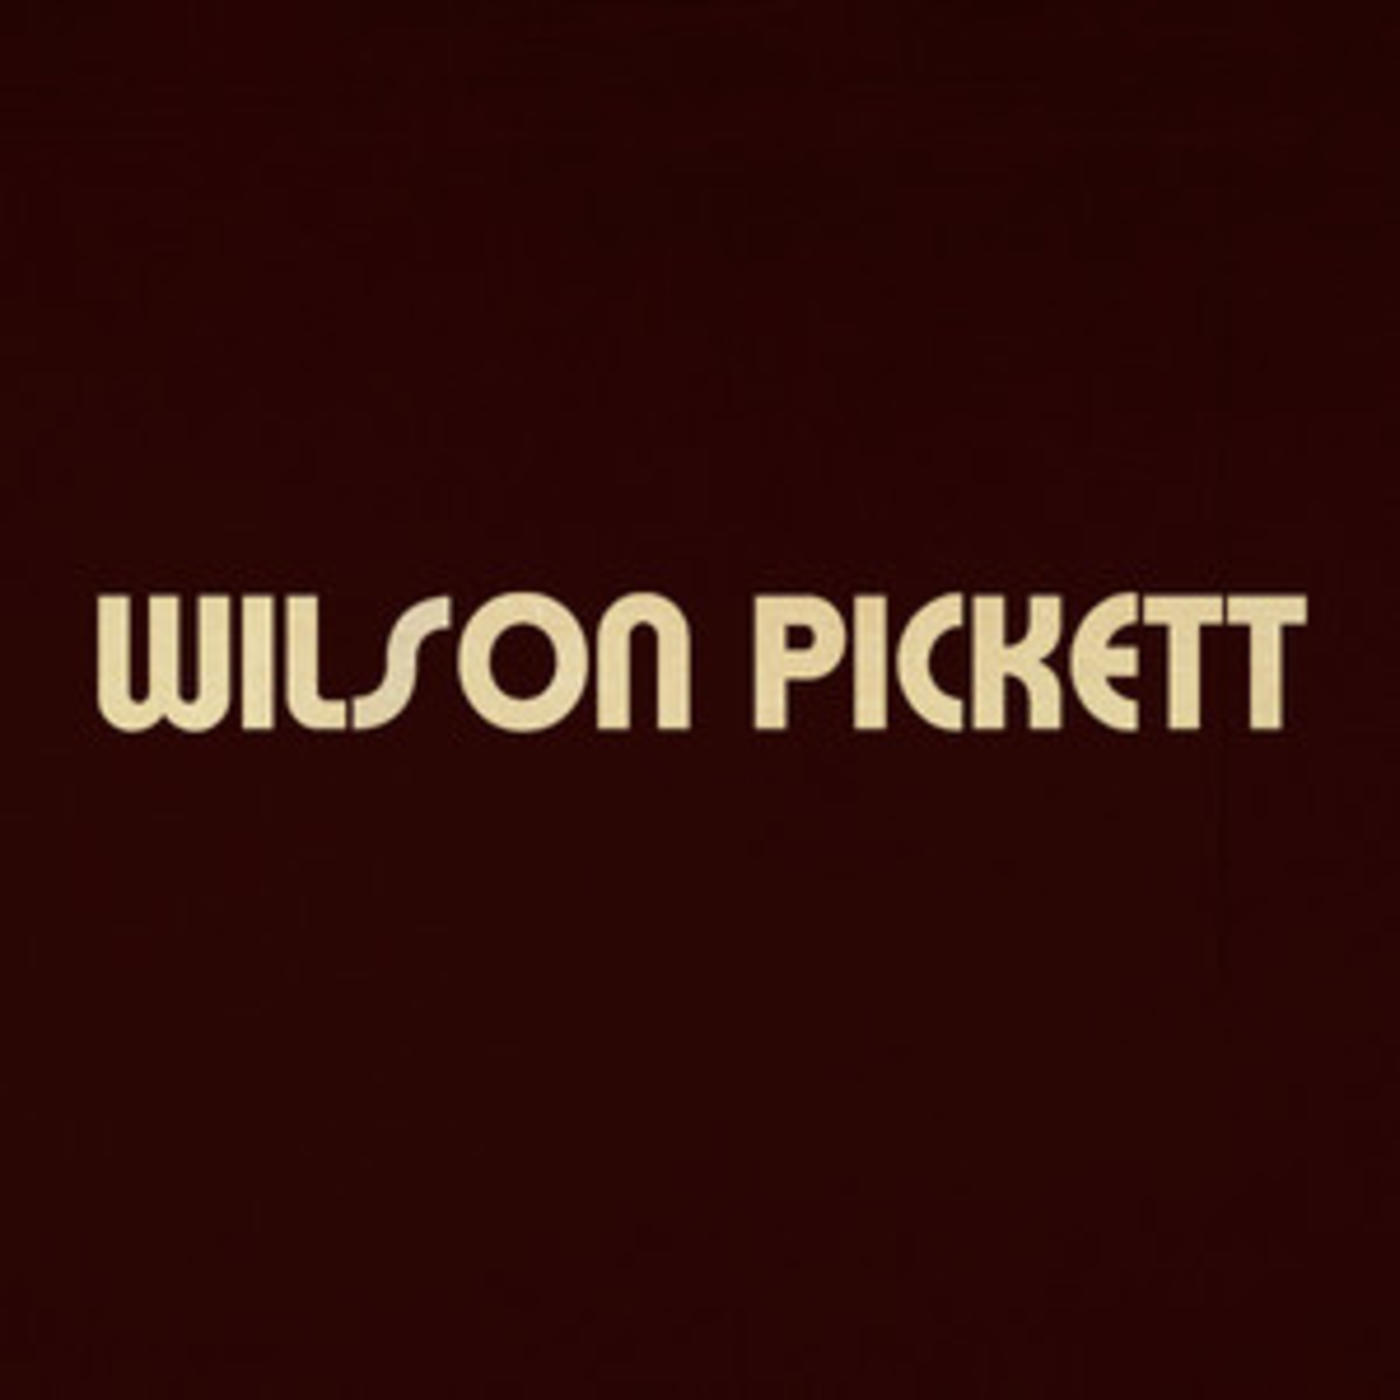 Wilson Pickett - Official Playlist - Land Of 1000 Dances, Mustang Sally, In The Midnight Hour